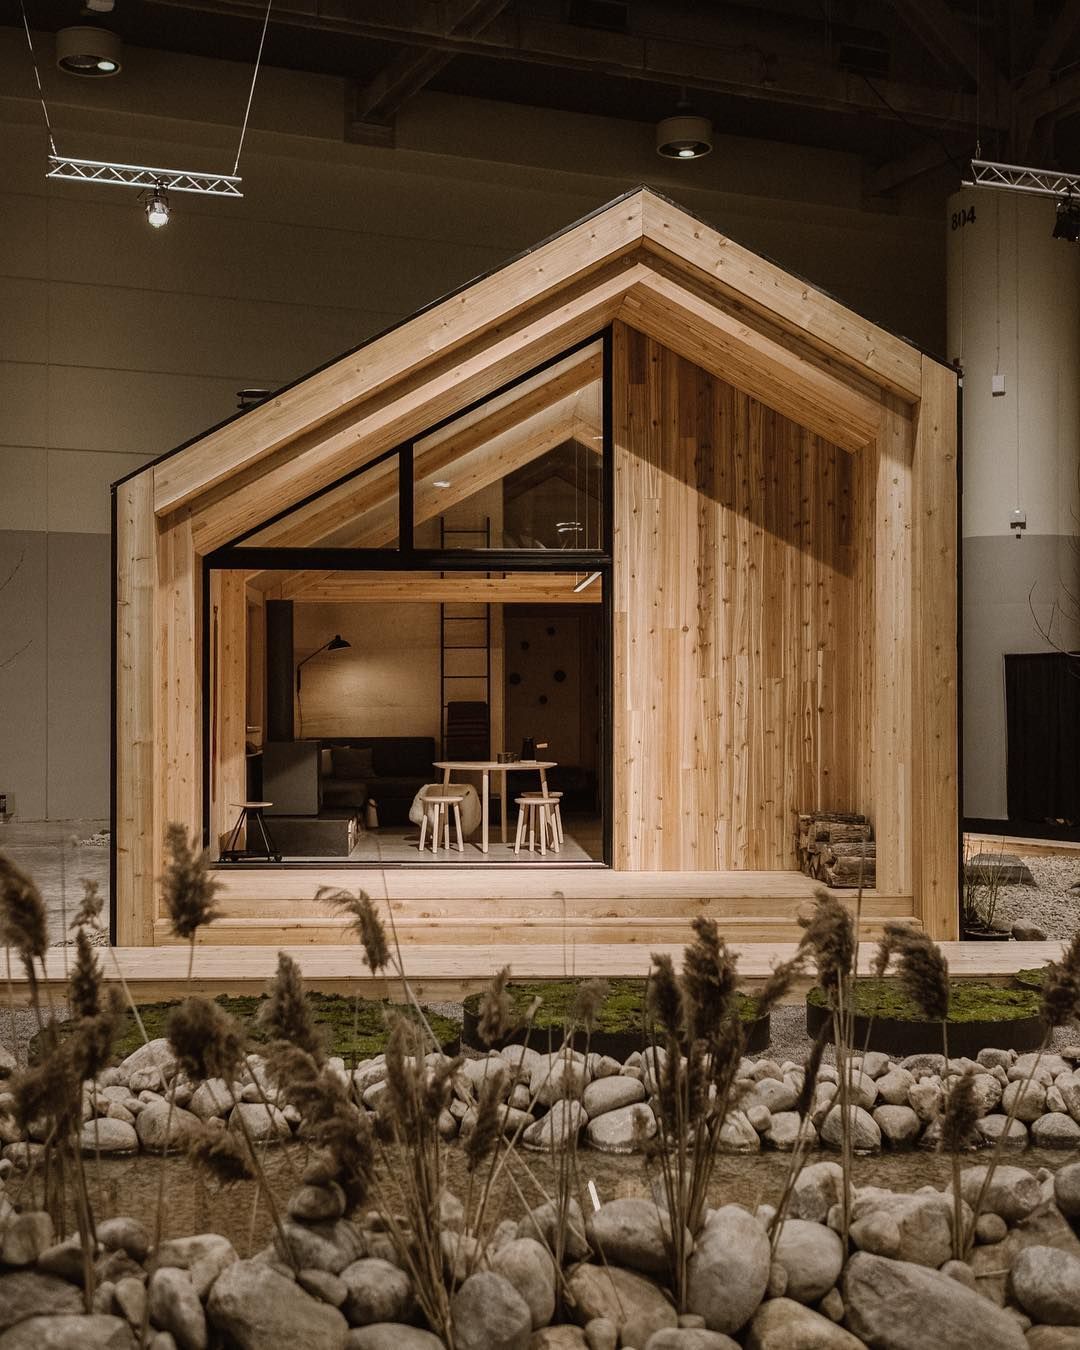 Customized Pre-Fab Cabins are So Cozy You’ll Want to Go into The Woods